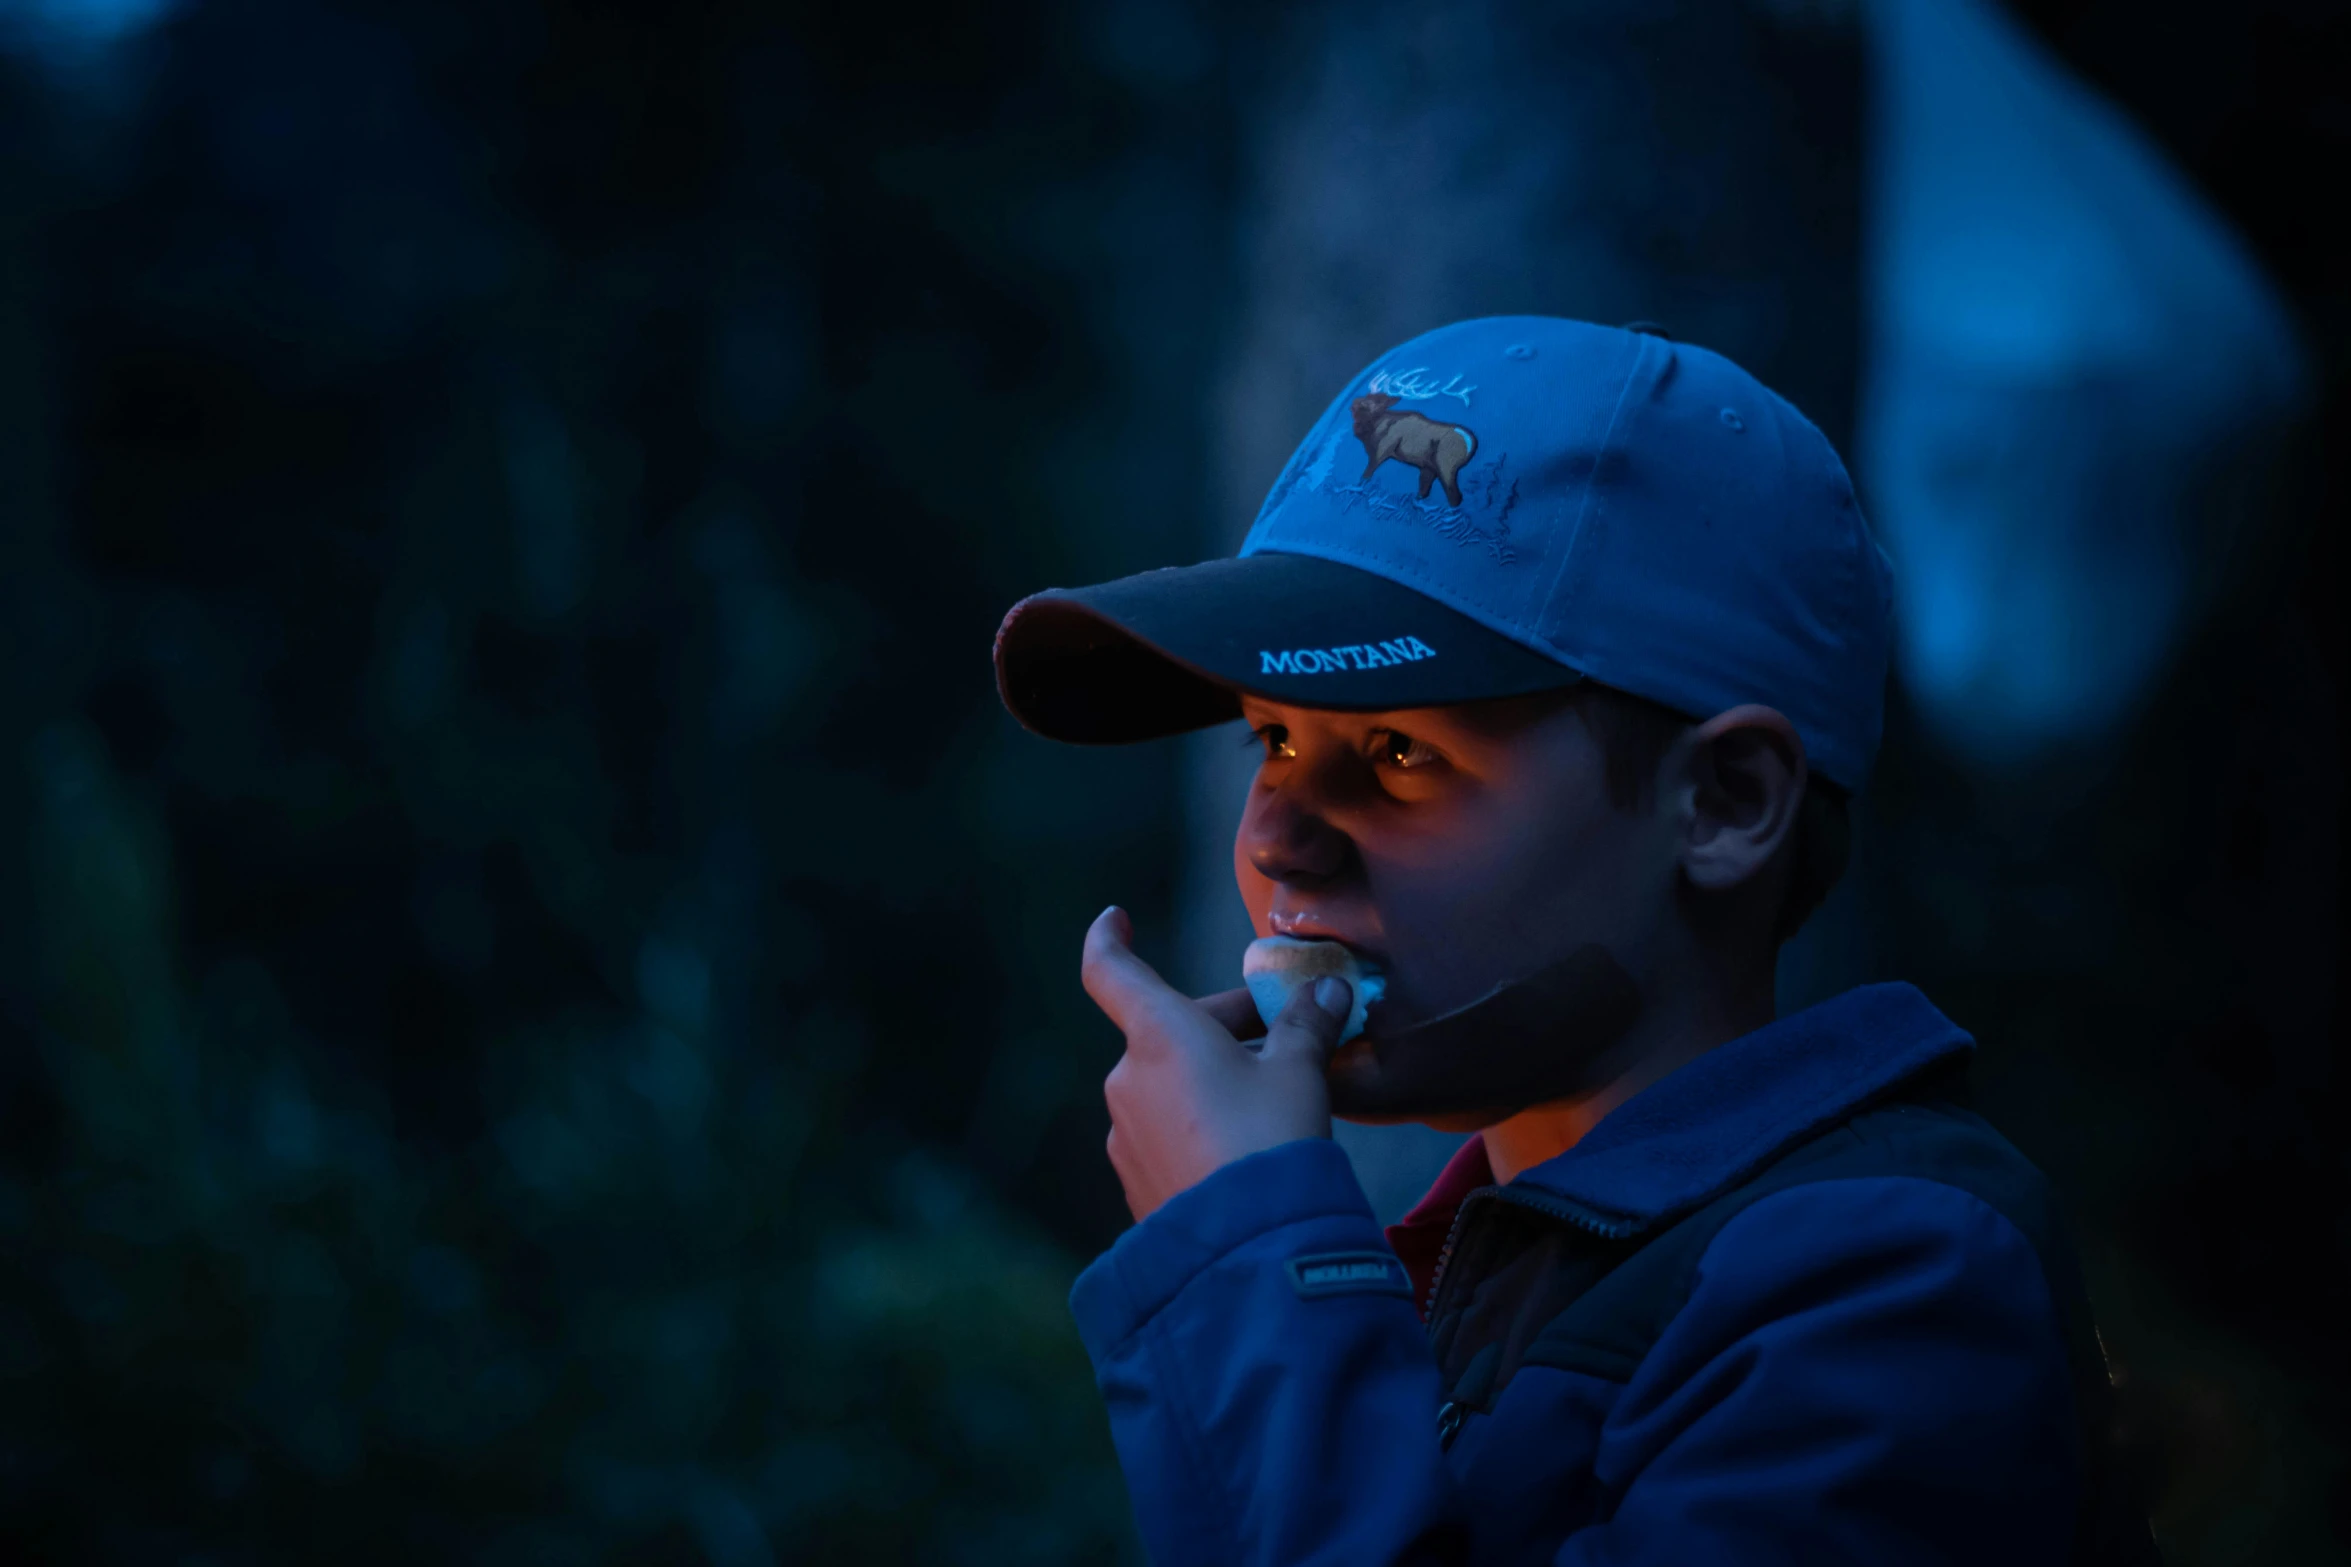 a little boy smoking soing at night while wearing a hat